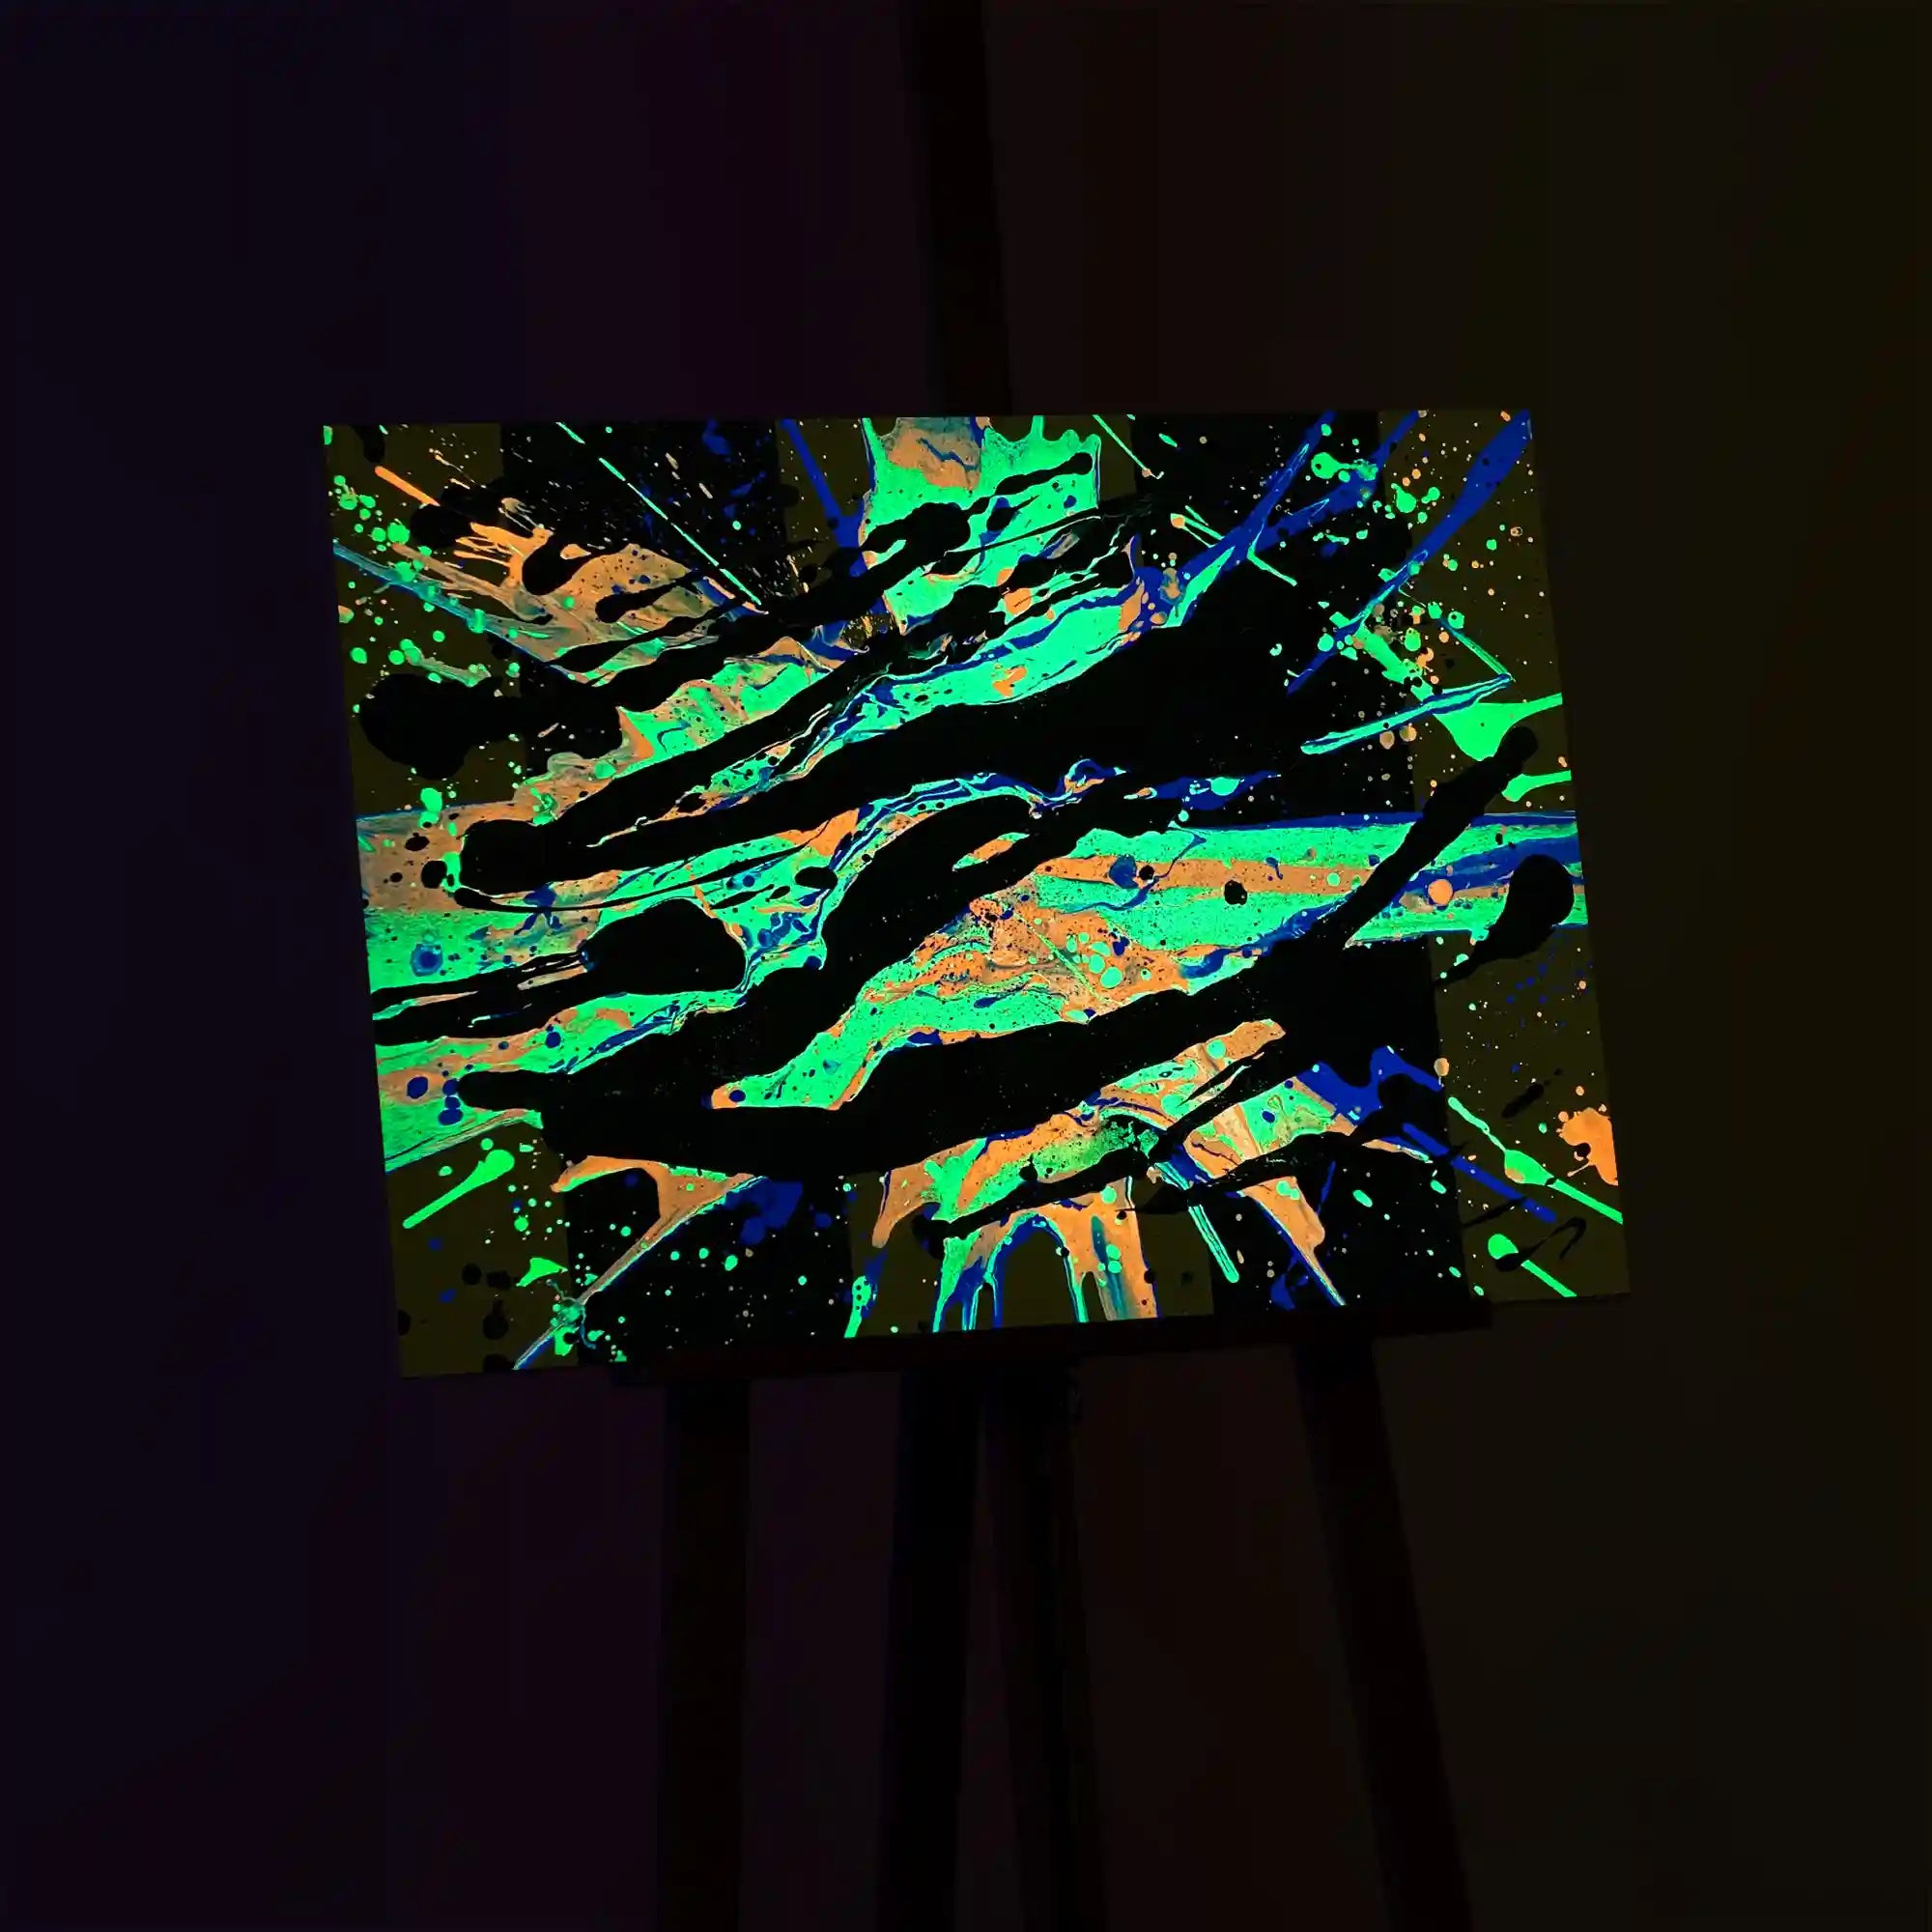 Glow in the dark Super Nova Inferno' depicting intense swirling greens and oranges that mimic the chaotic, fiery environment of a supernova, 